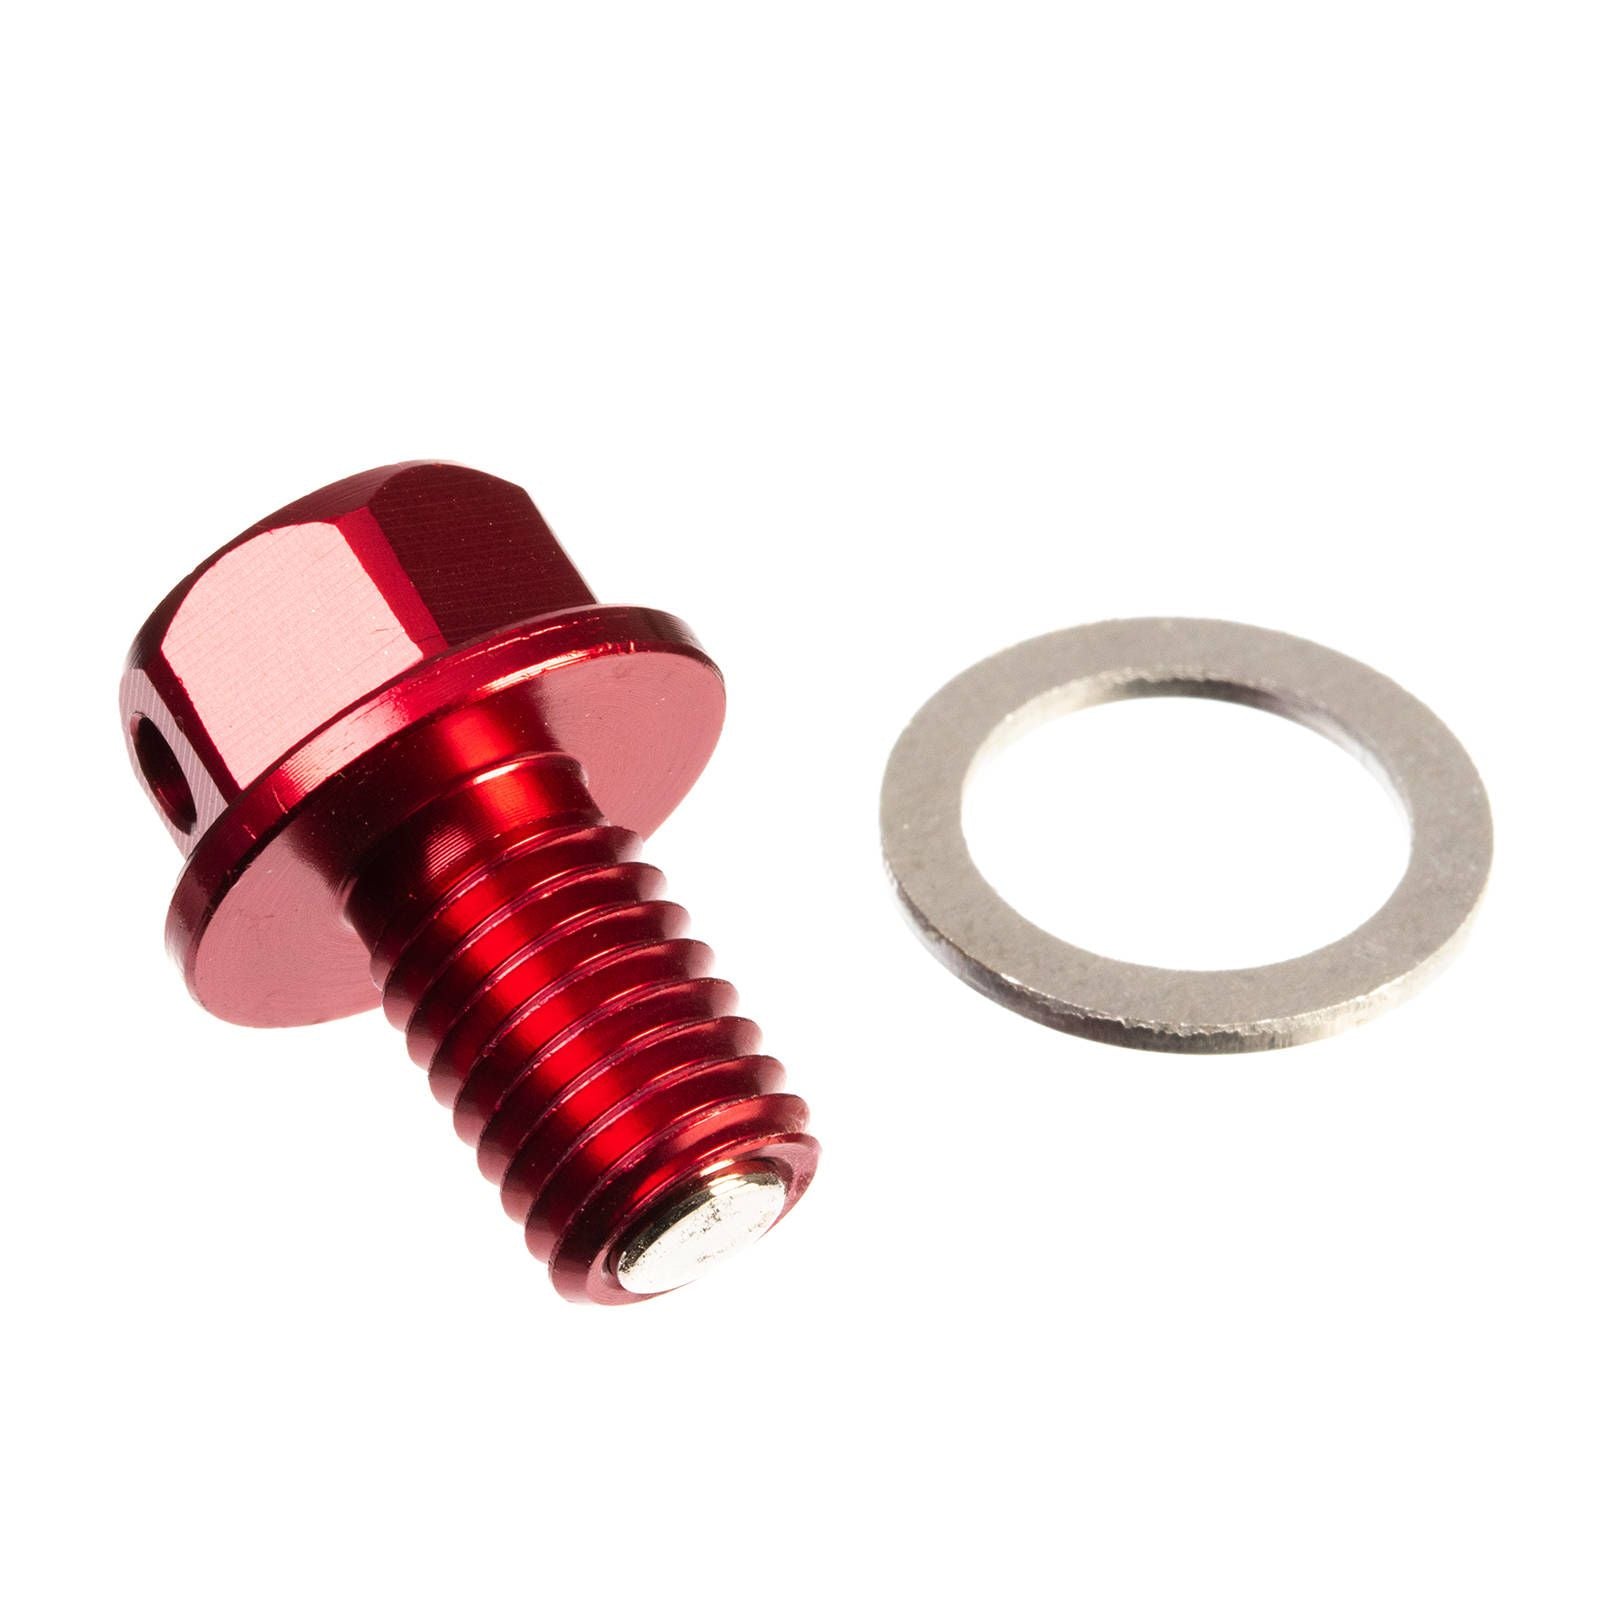 New WHITES Magnetic Sump Plug M10 x 15 x 1.5 - Red #WPMDP101515R